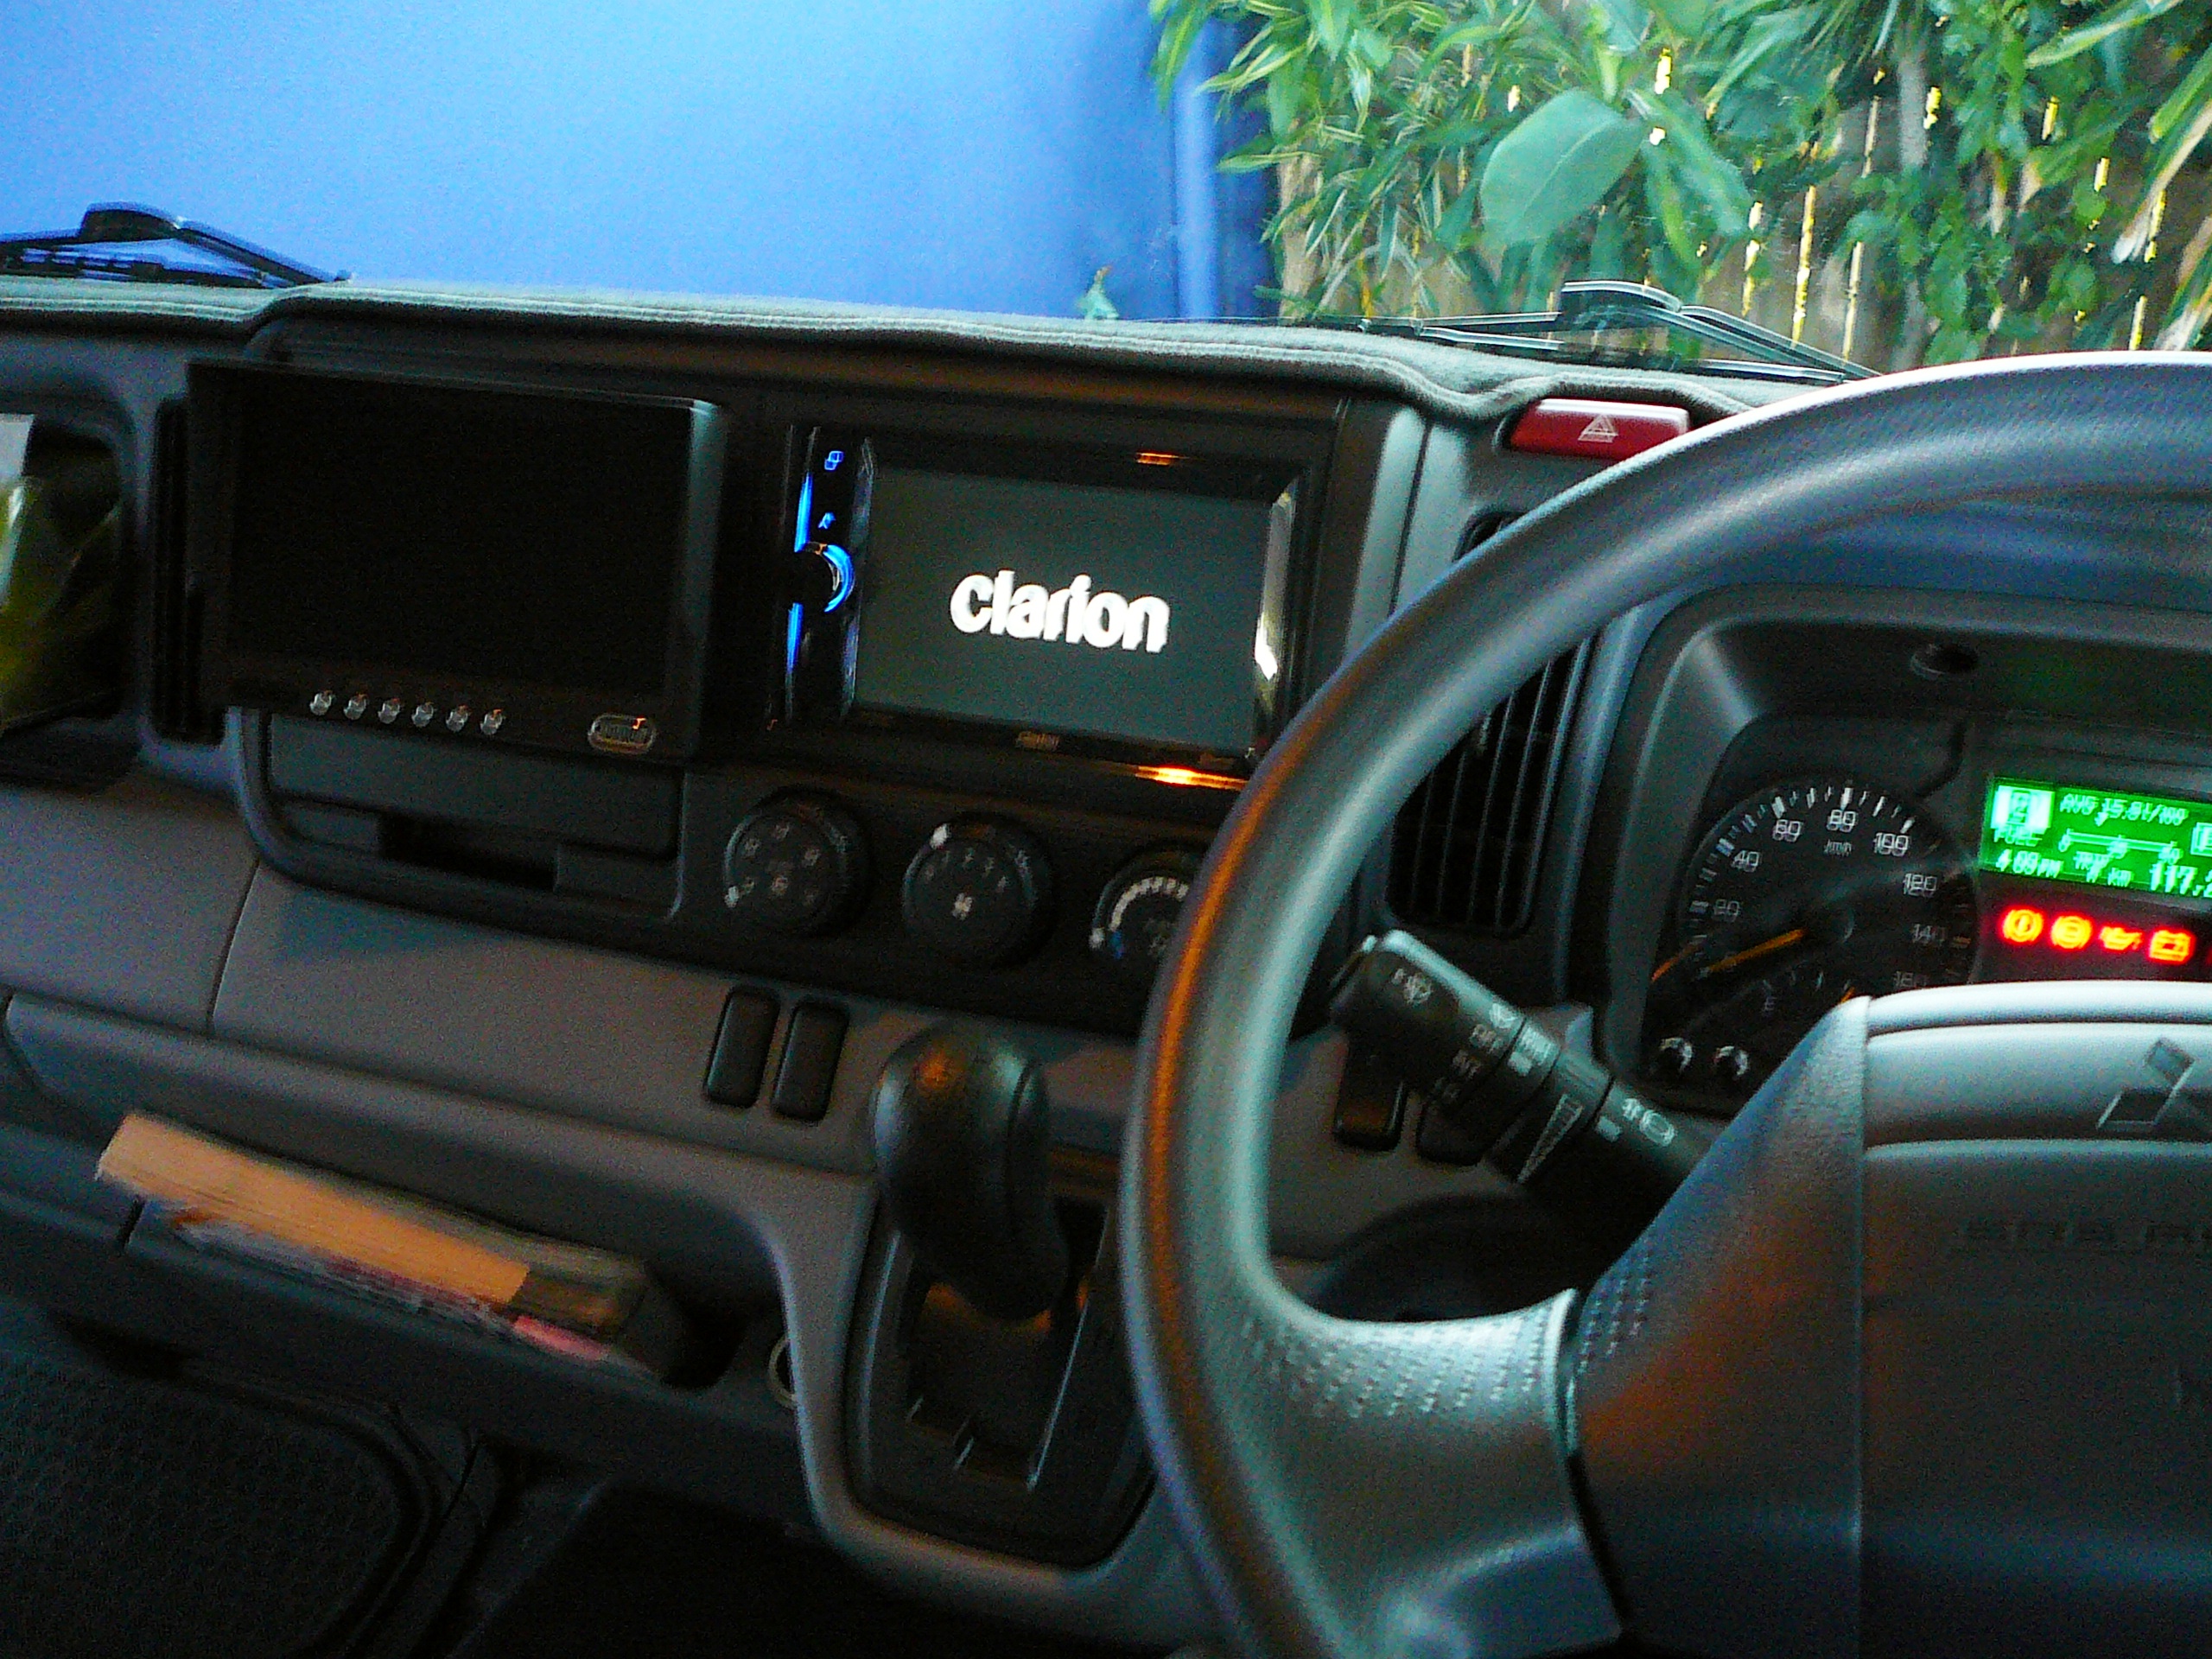 Mitsubishi Fuso 2012, GPS navigation system with multiple cameras on seperate monitor